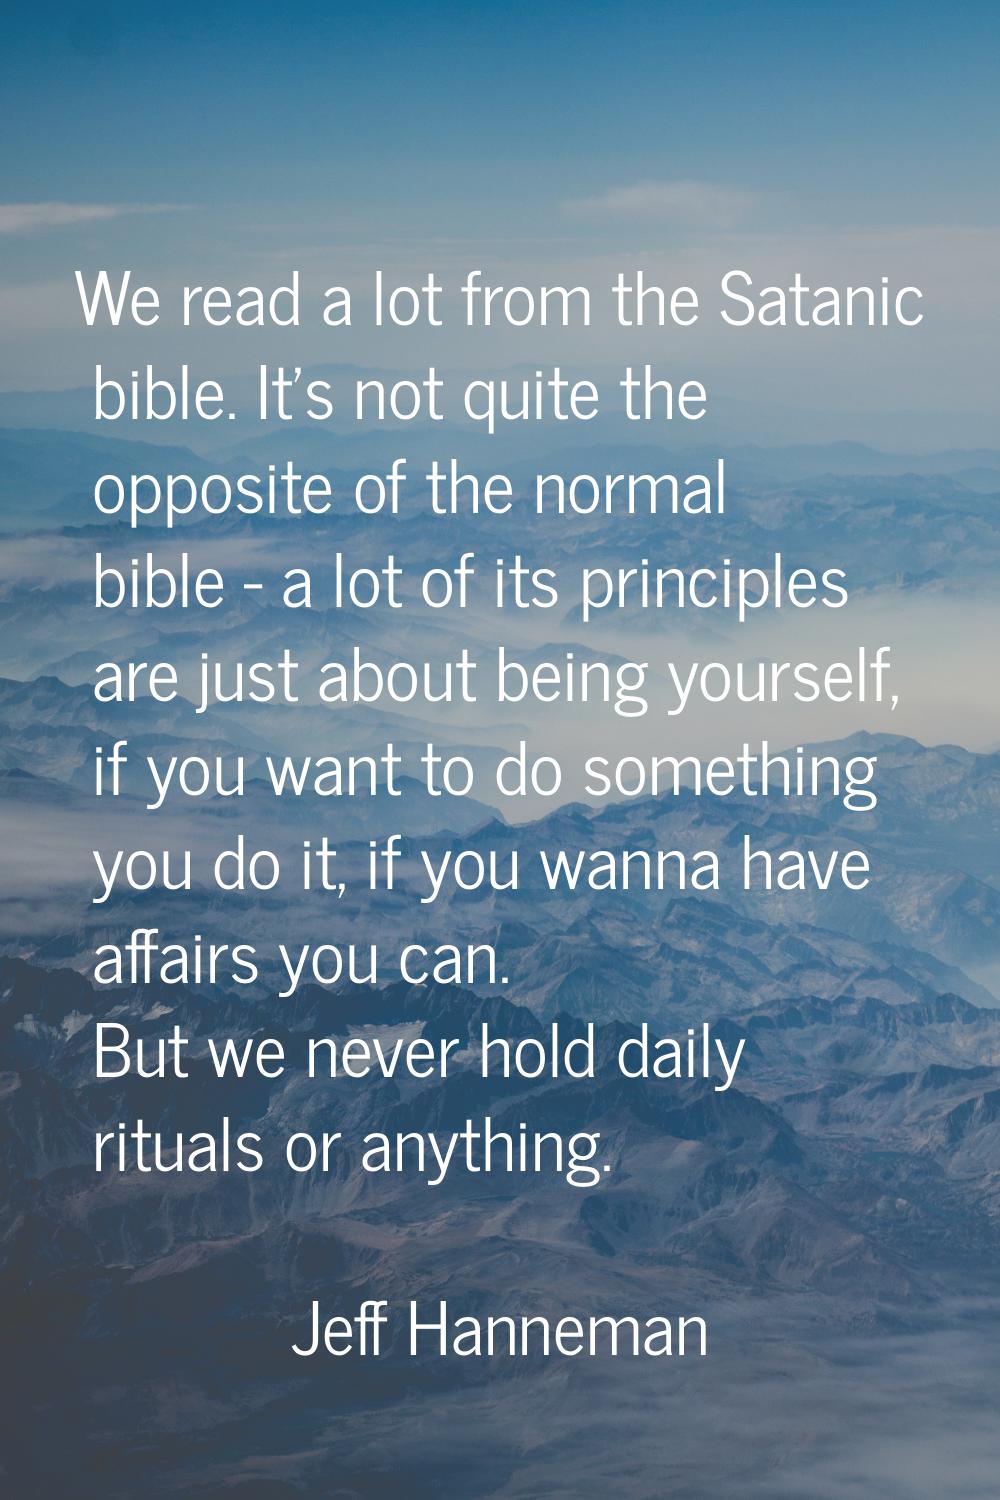 We read a lot from the Satanic bible. It's not quite the opposite of the normal bible - a lot of it